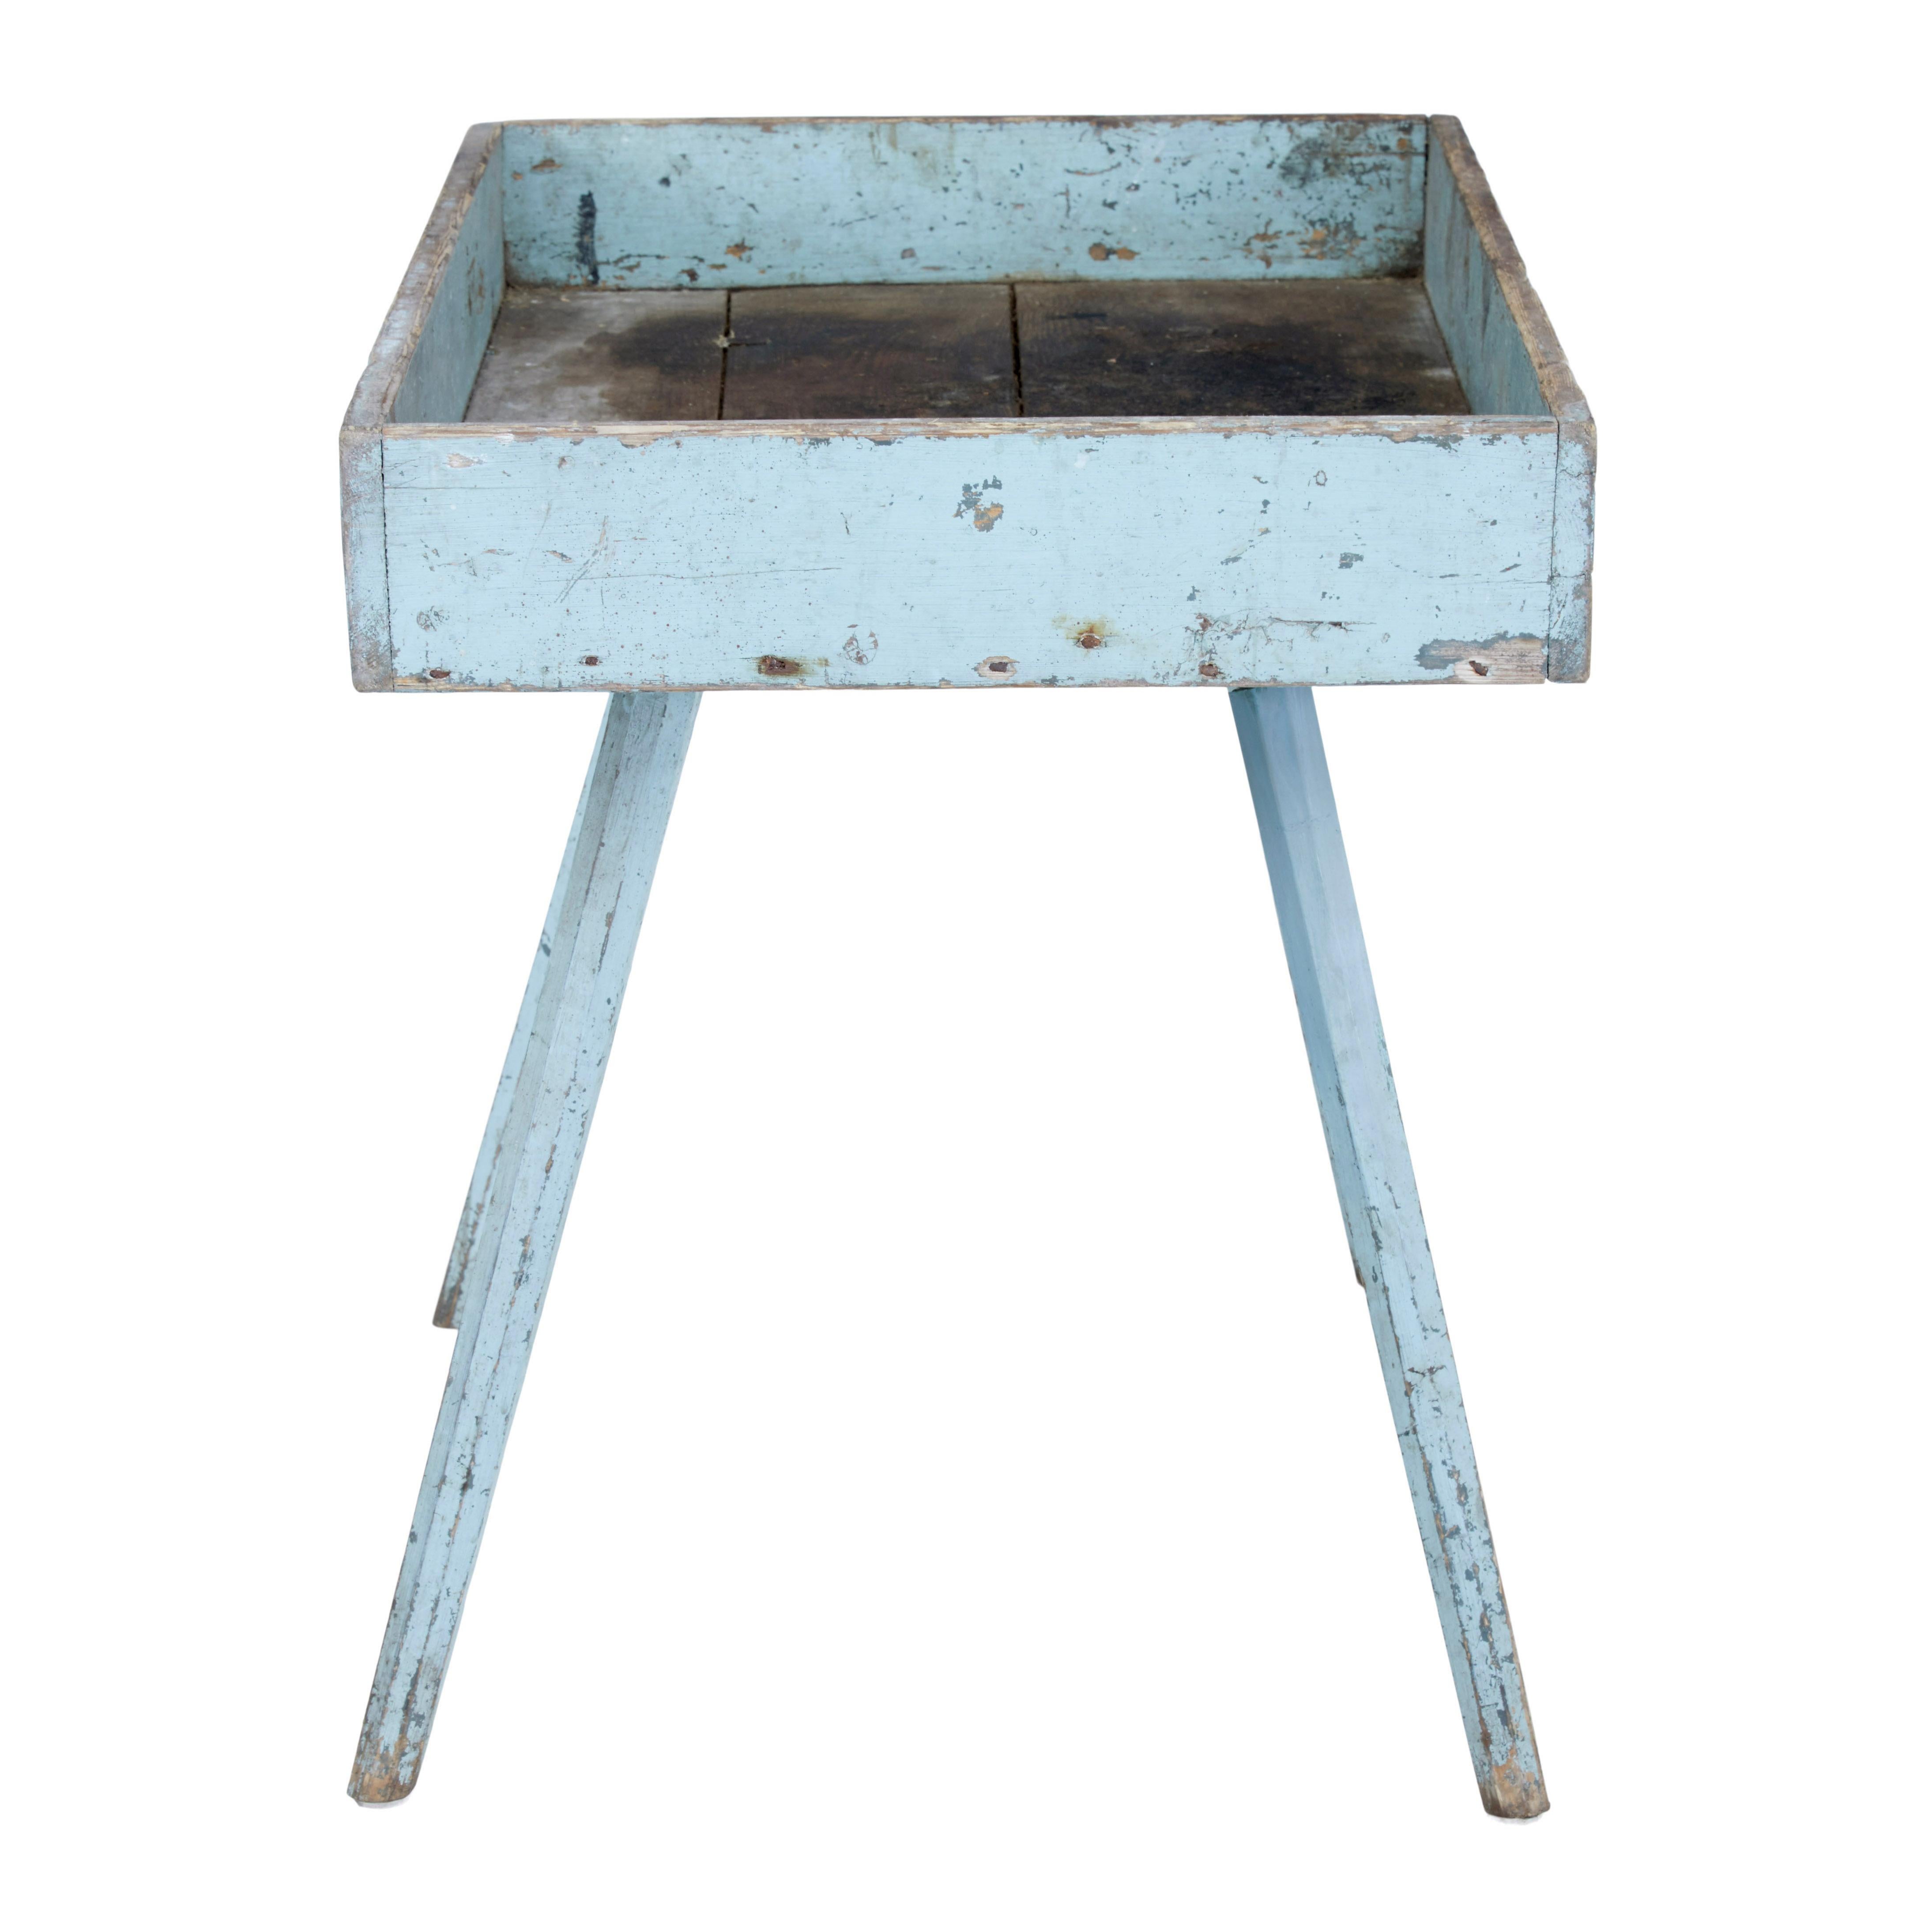 19th Century Rustic Painted Pine Garden Room Tray Table For Sale 3